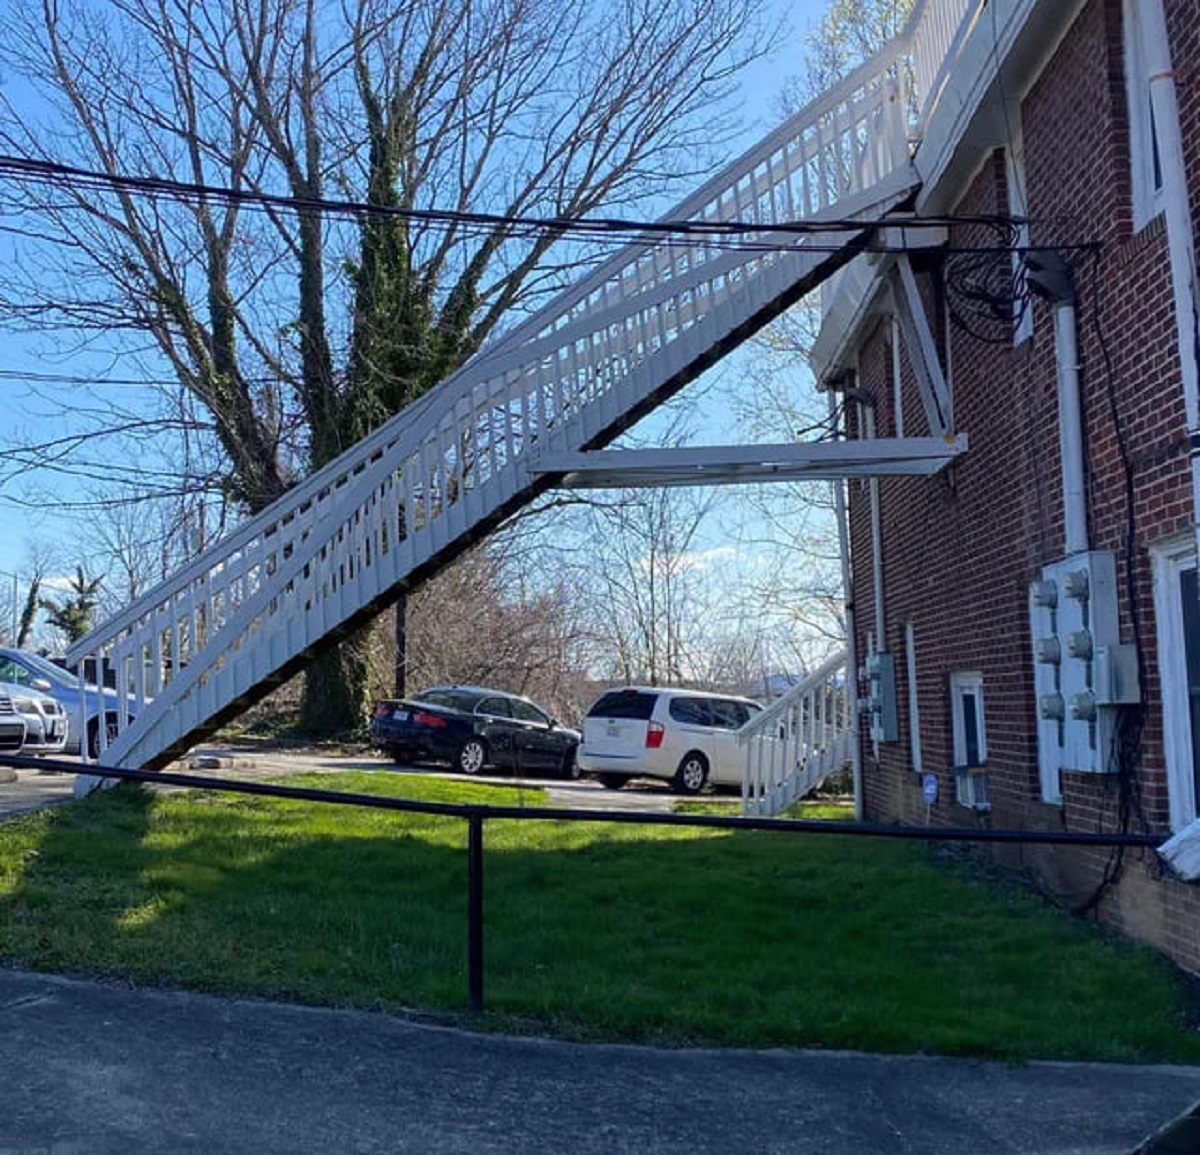 30 Hilarious Examples of Blue-Collar Engineering 